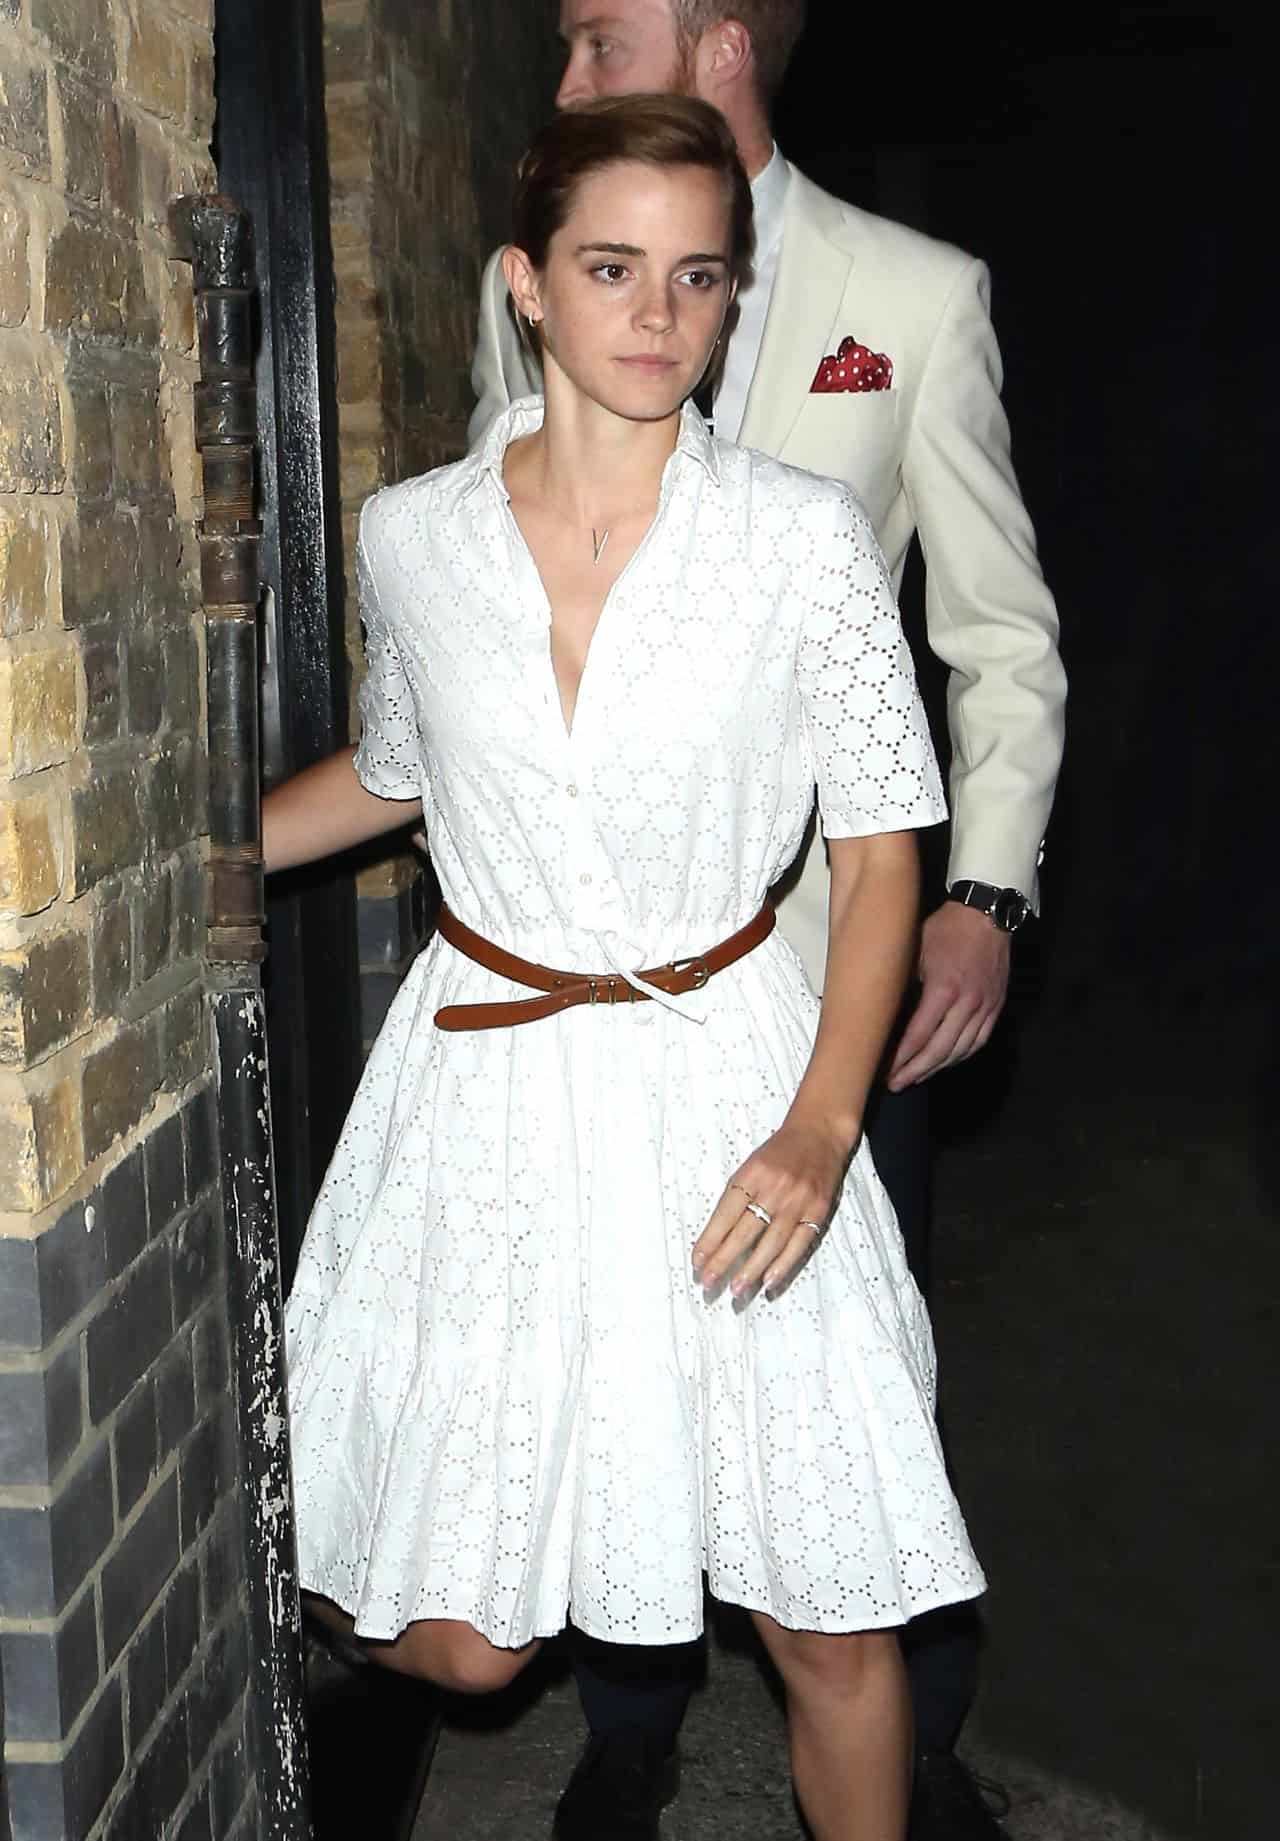 Emma Watson Shows Off her Bust in Retro Dress at the Chiltern Firehouse